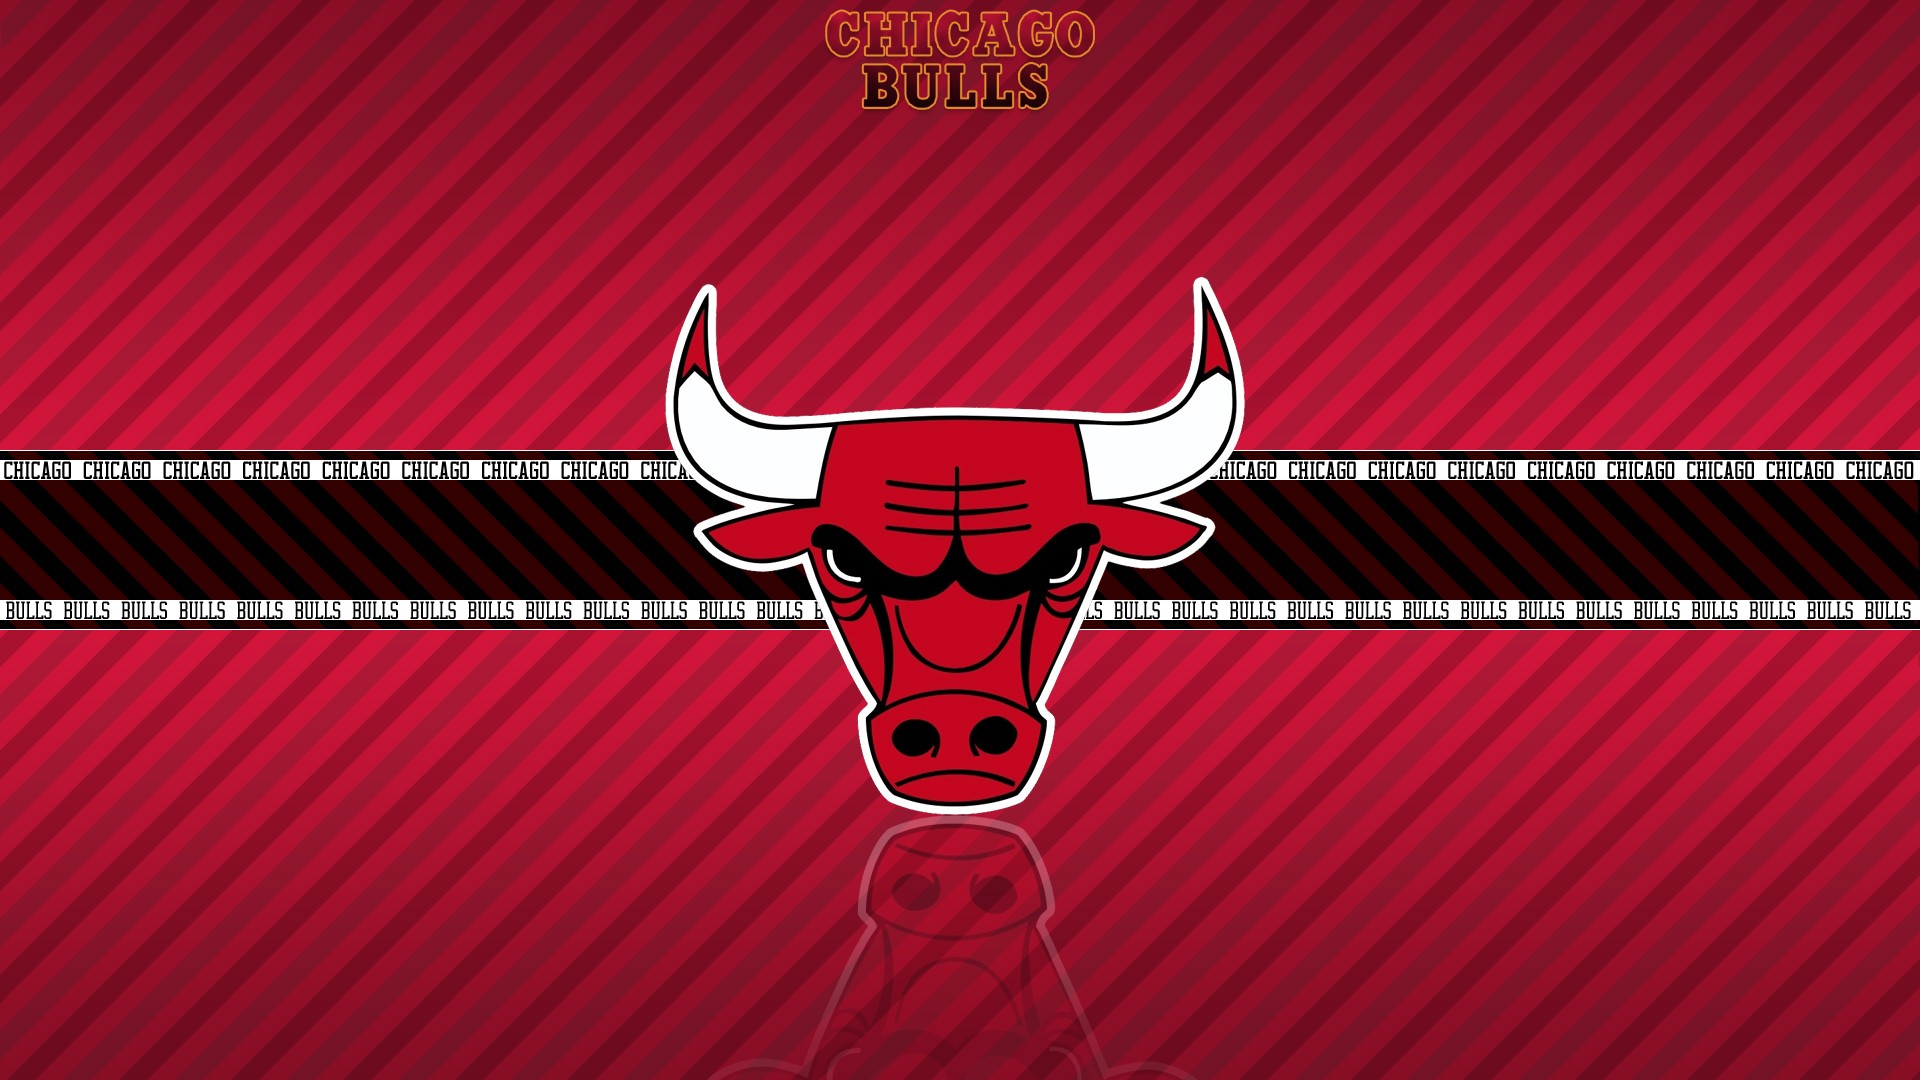 Chicago Bulls wallpaper HD background download Facebook Covers